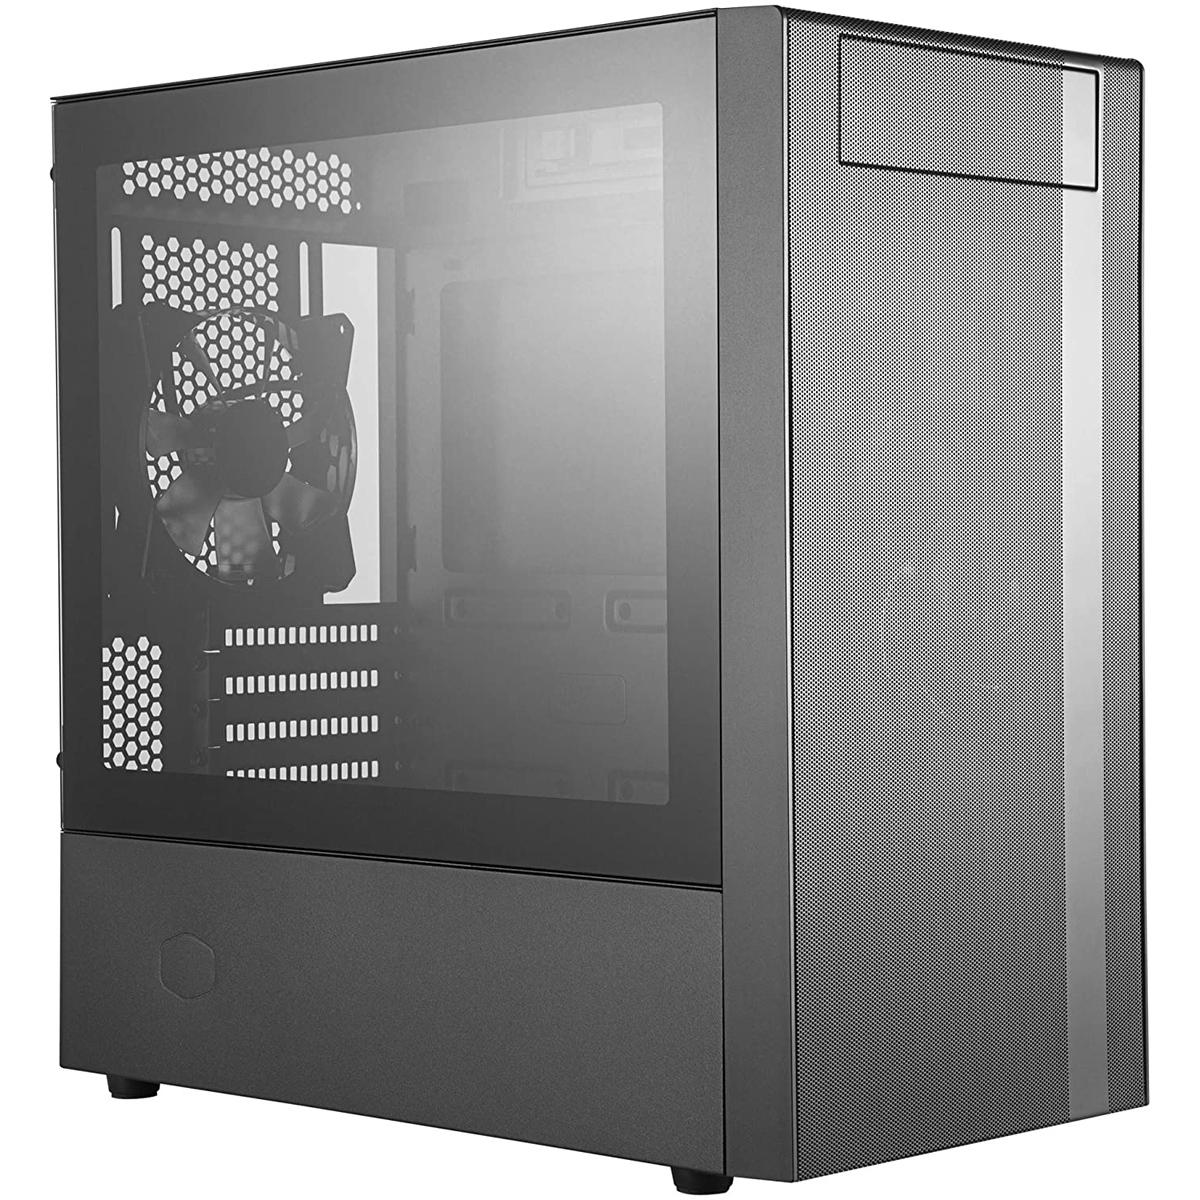 Cooler MasterBox NR400 microATX Tempered Computer Case for $34.99 Shipped